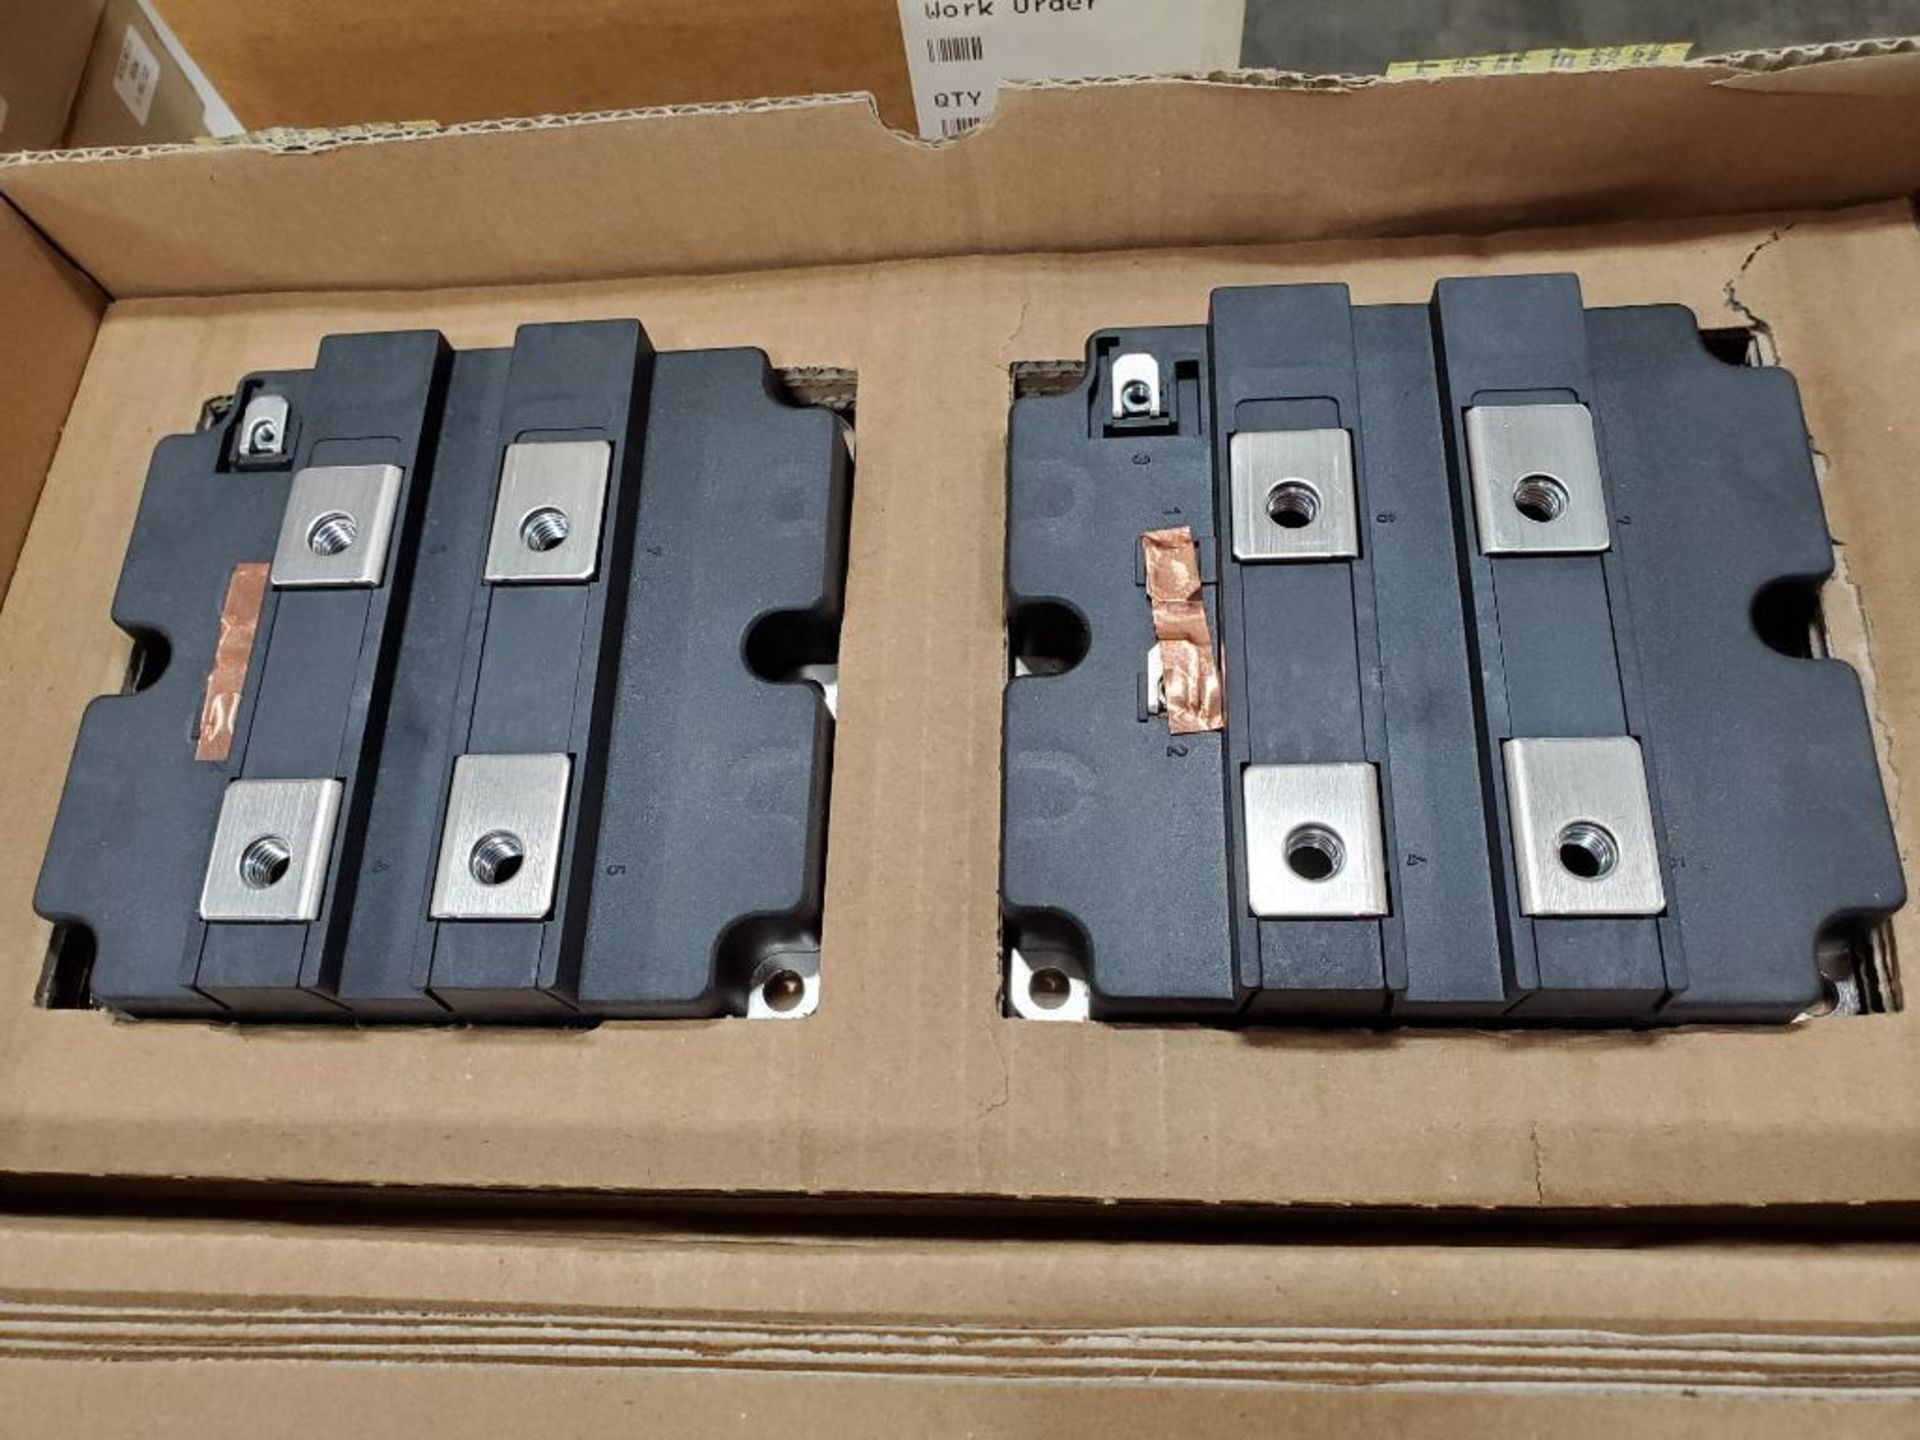 Qty 6 - Infineon semiconductor units. Part number FZ1600R17HP4. Boxed 2 per box bulk. New in box. - Image 2 of 3